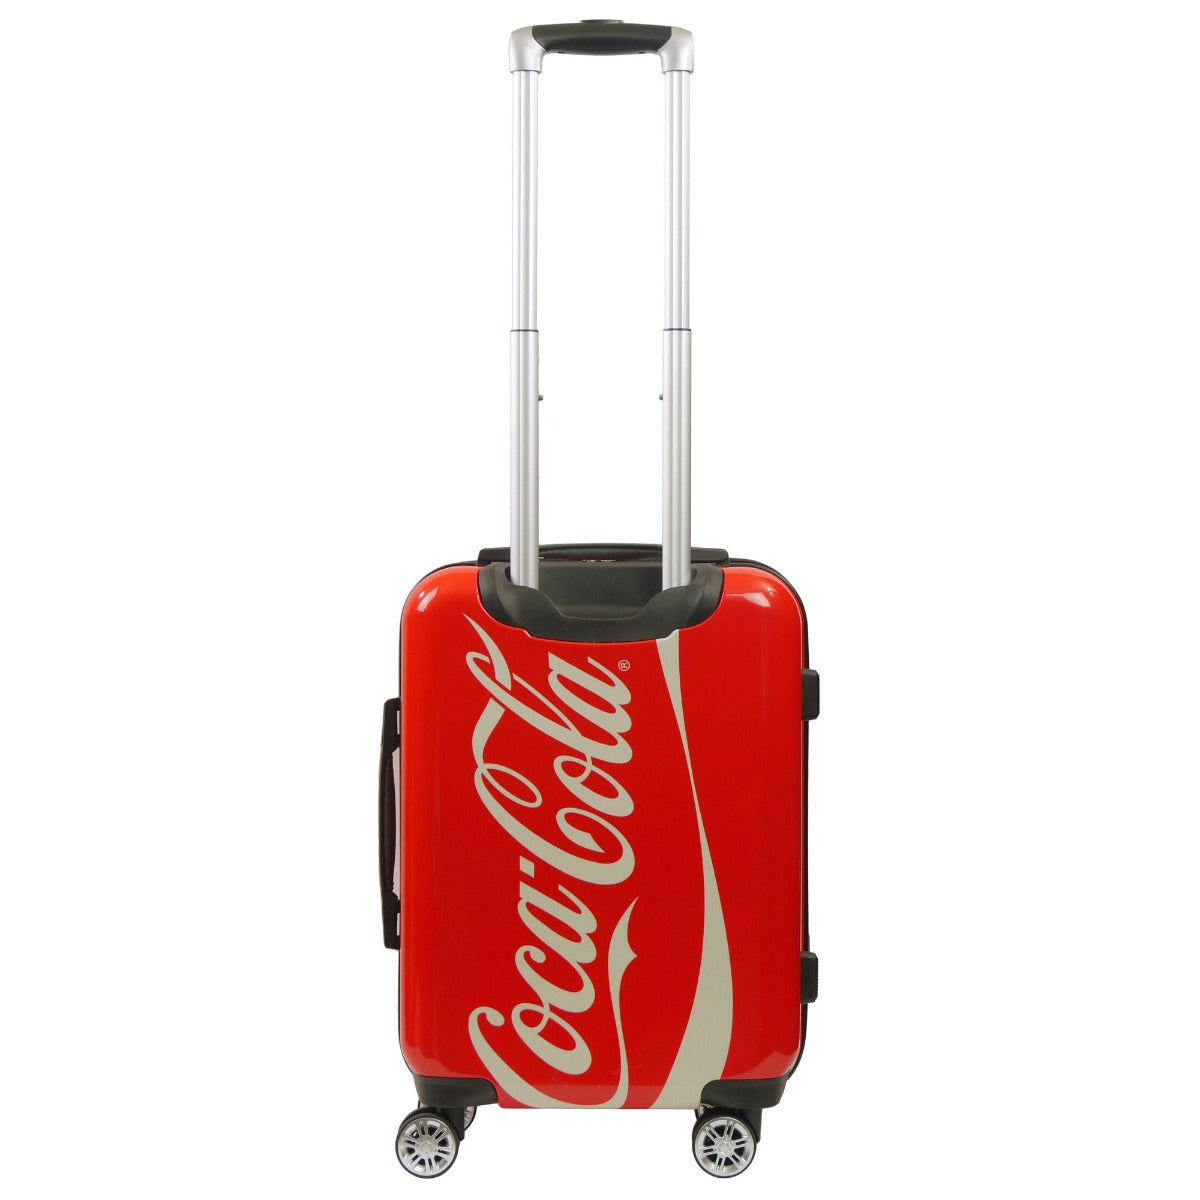 Ful Coca Cola 21 inch carry on hardside spinner suitcase - best luggage for travelling